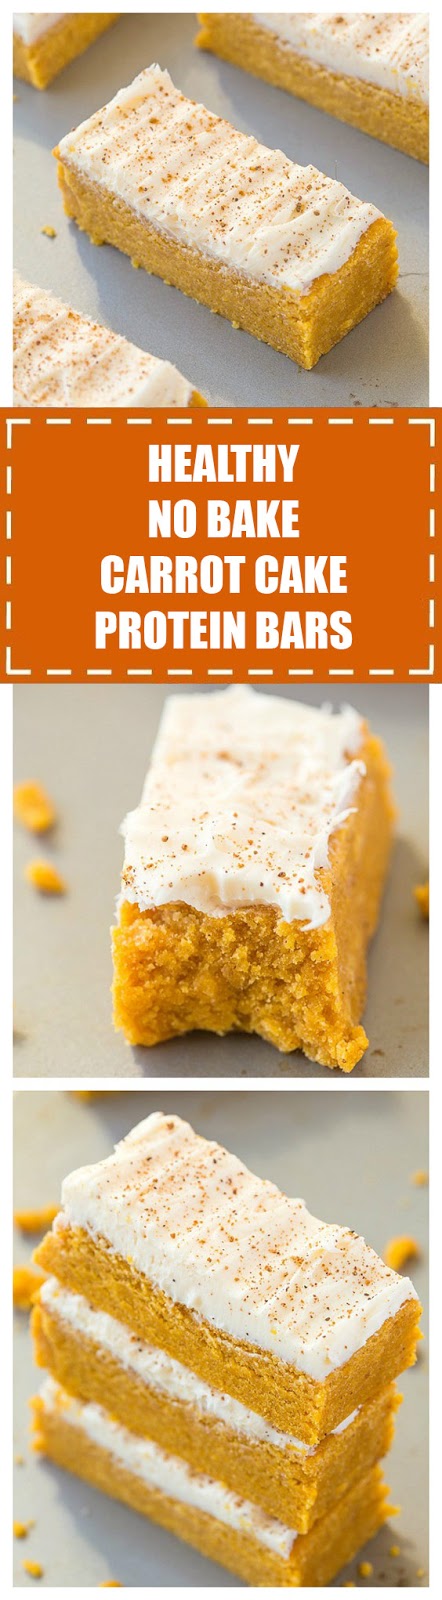 Healthy No Bake Carrot Cake Protein Bars